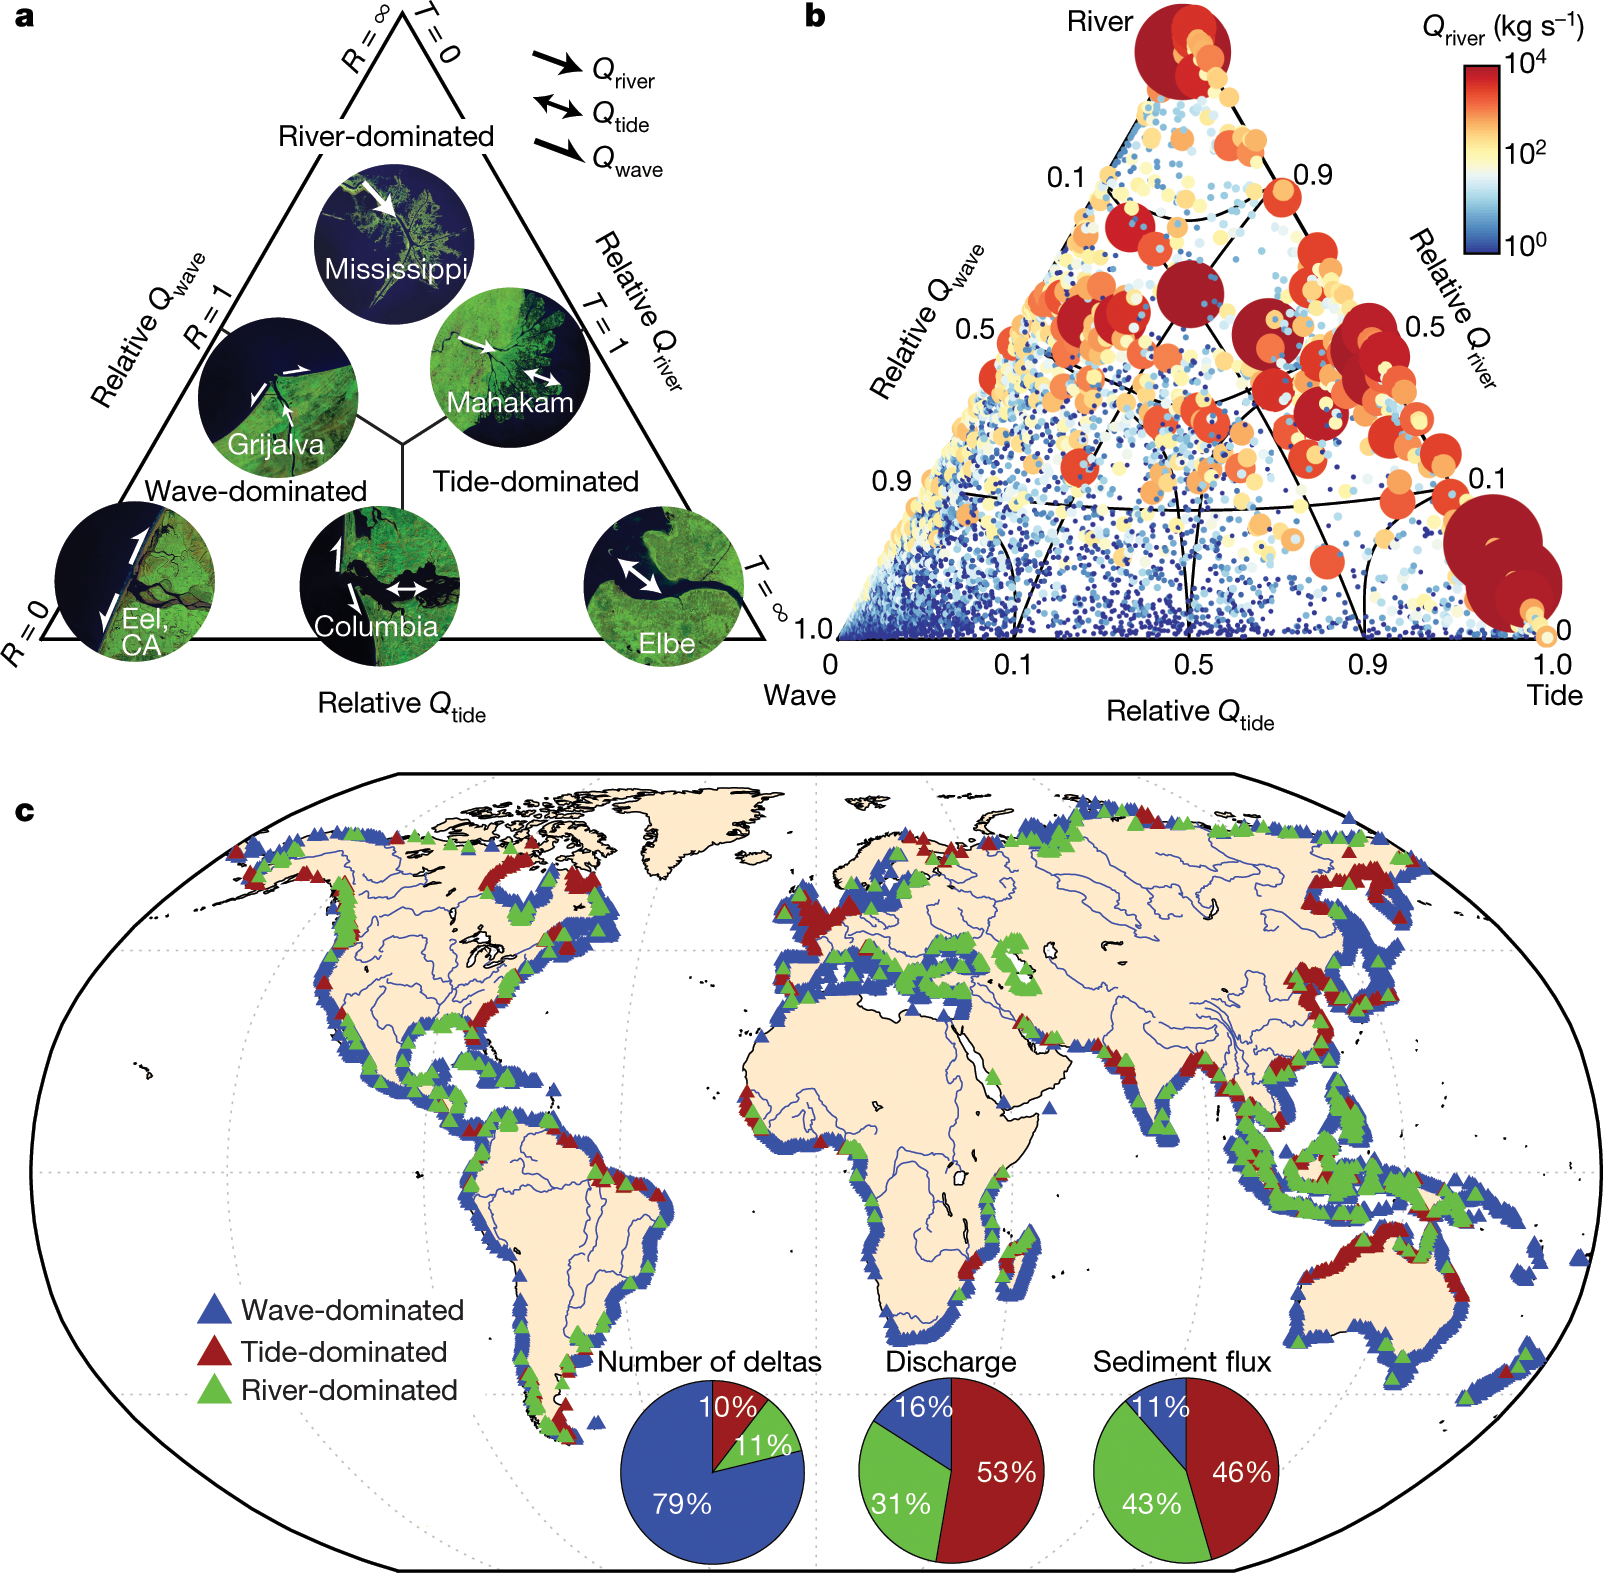 Global-scale human impact on delta morphology has led to net land area gain  | Nature